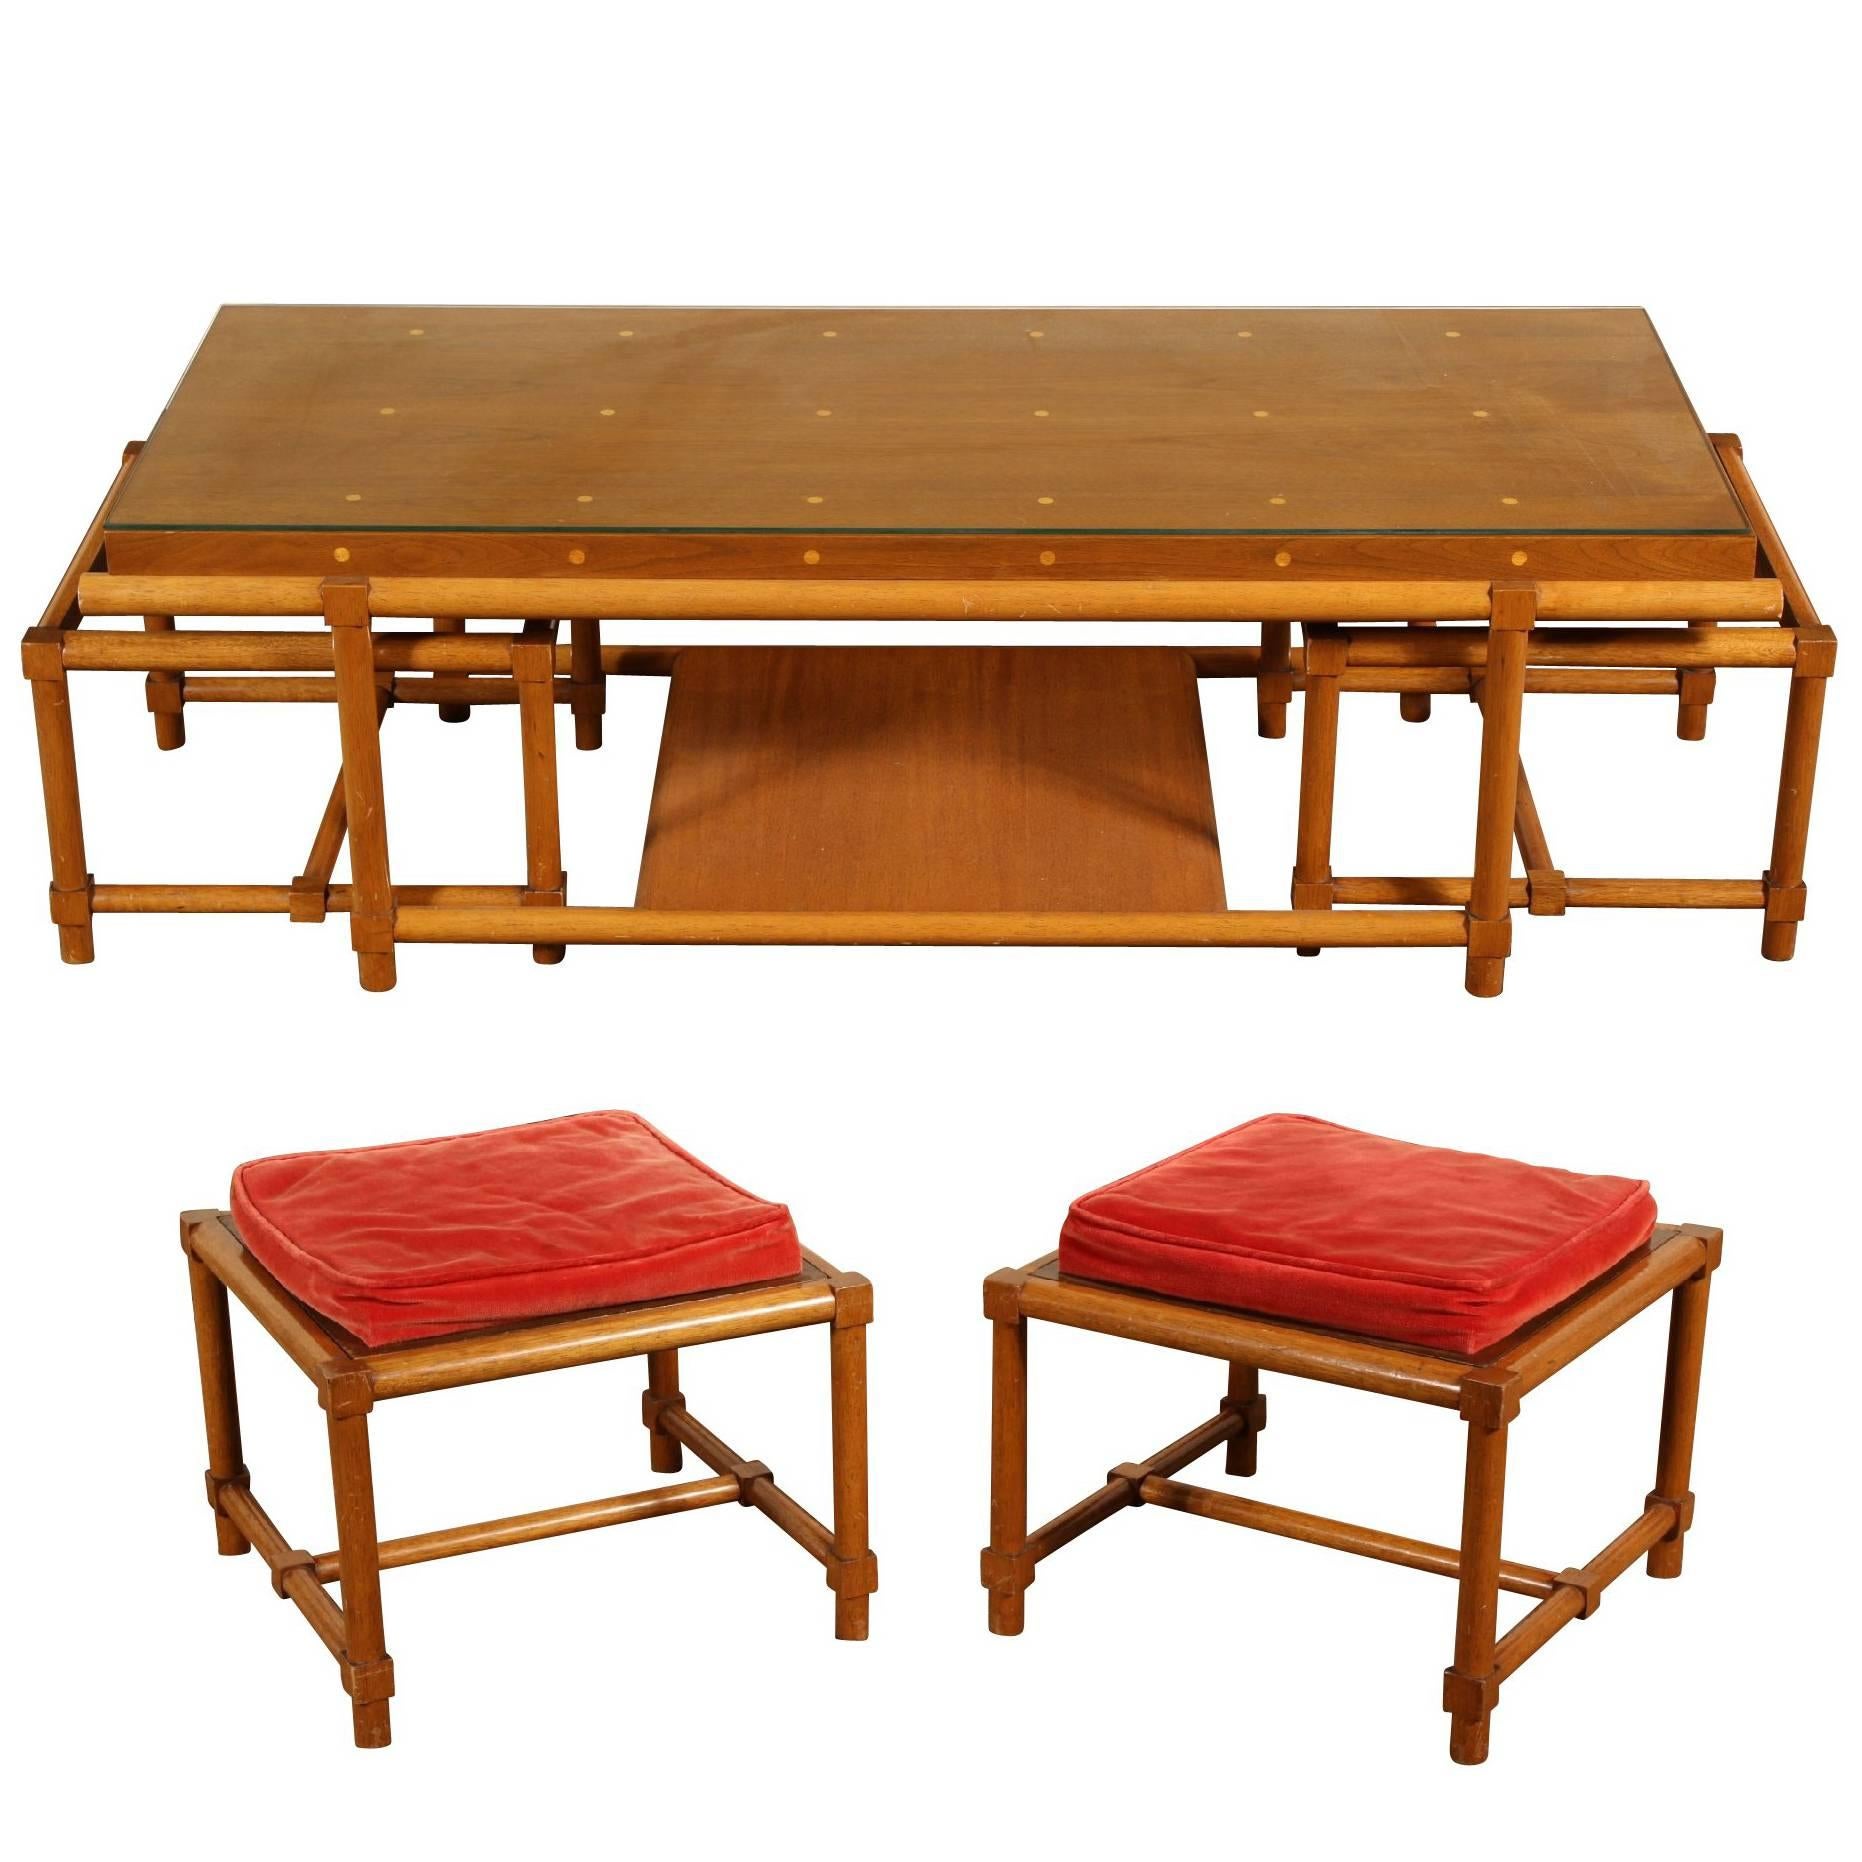 Rare Tommi Parzinger Mid-Century Modern Cocktail Table and Stools